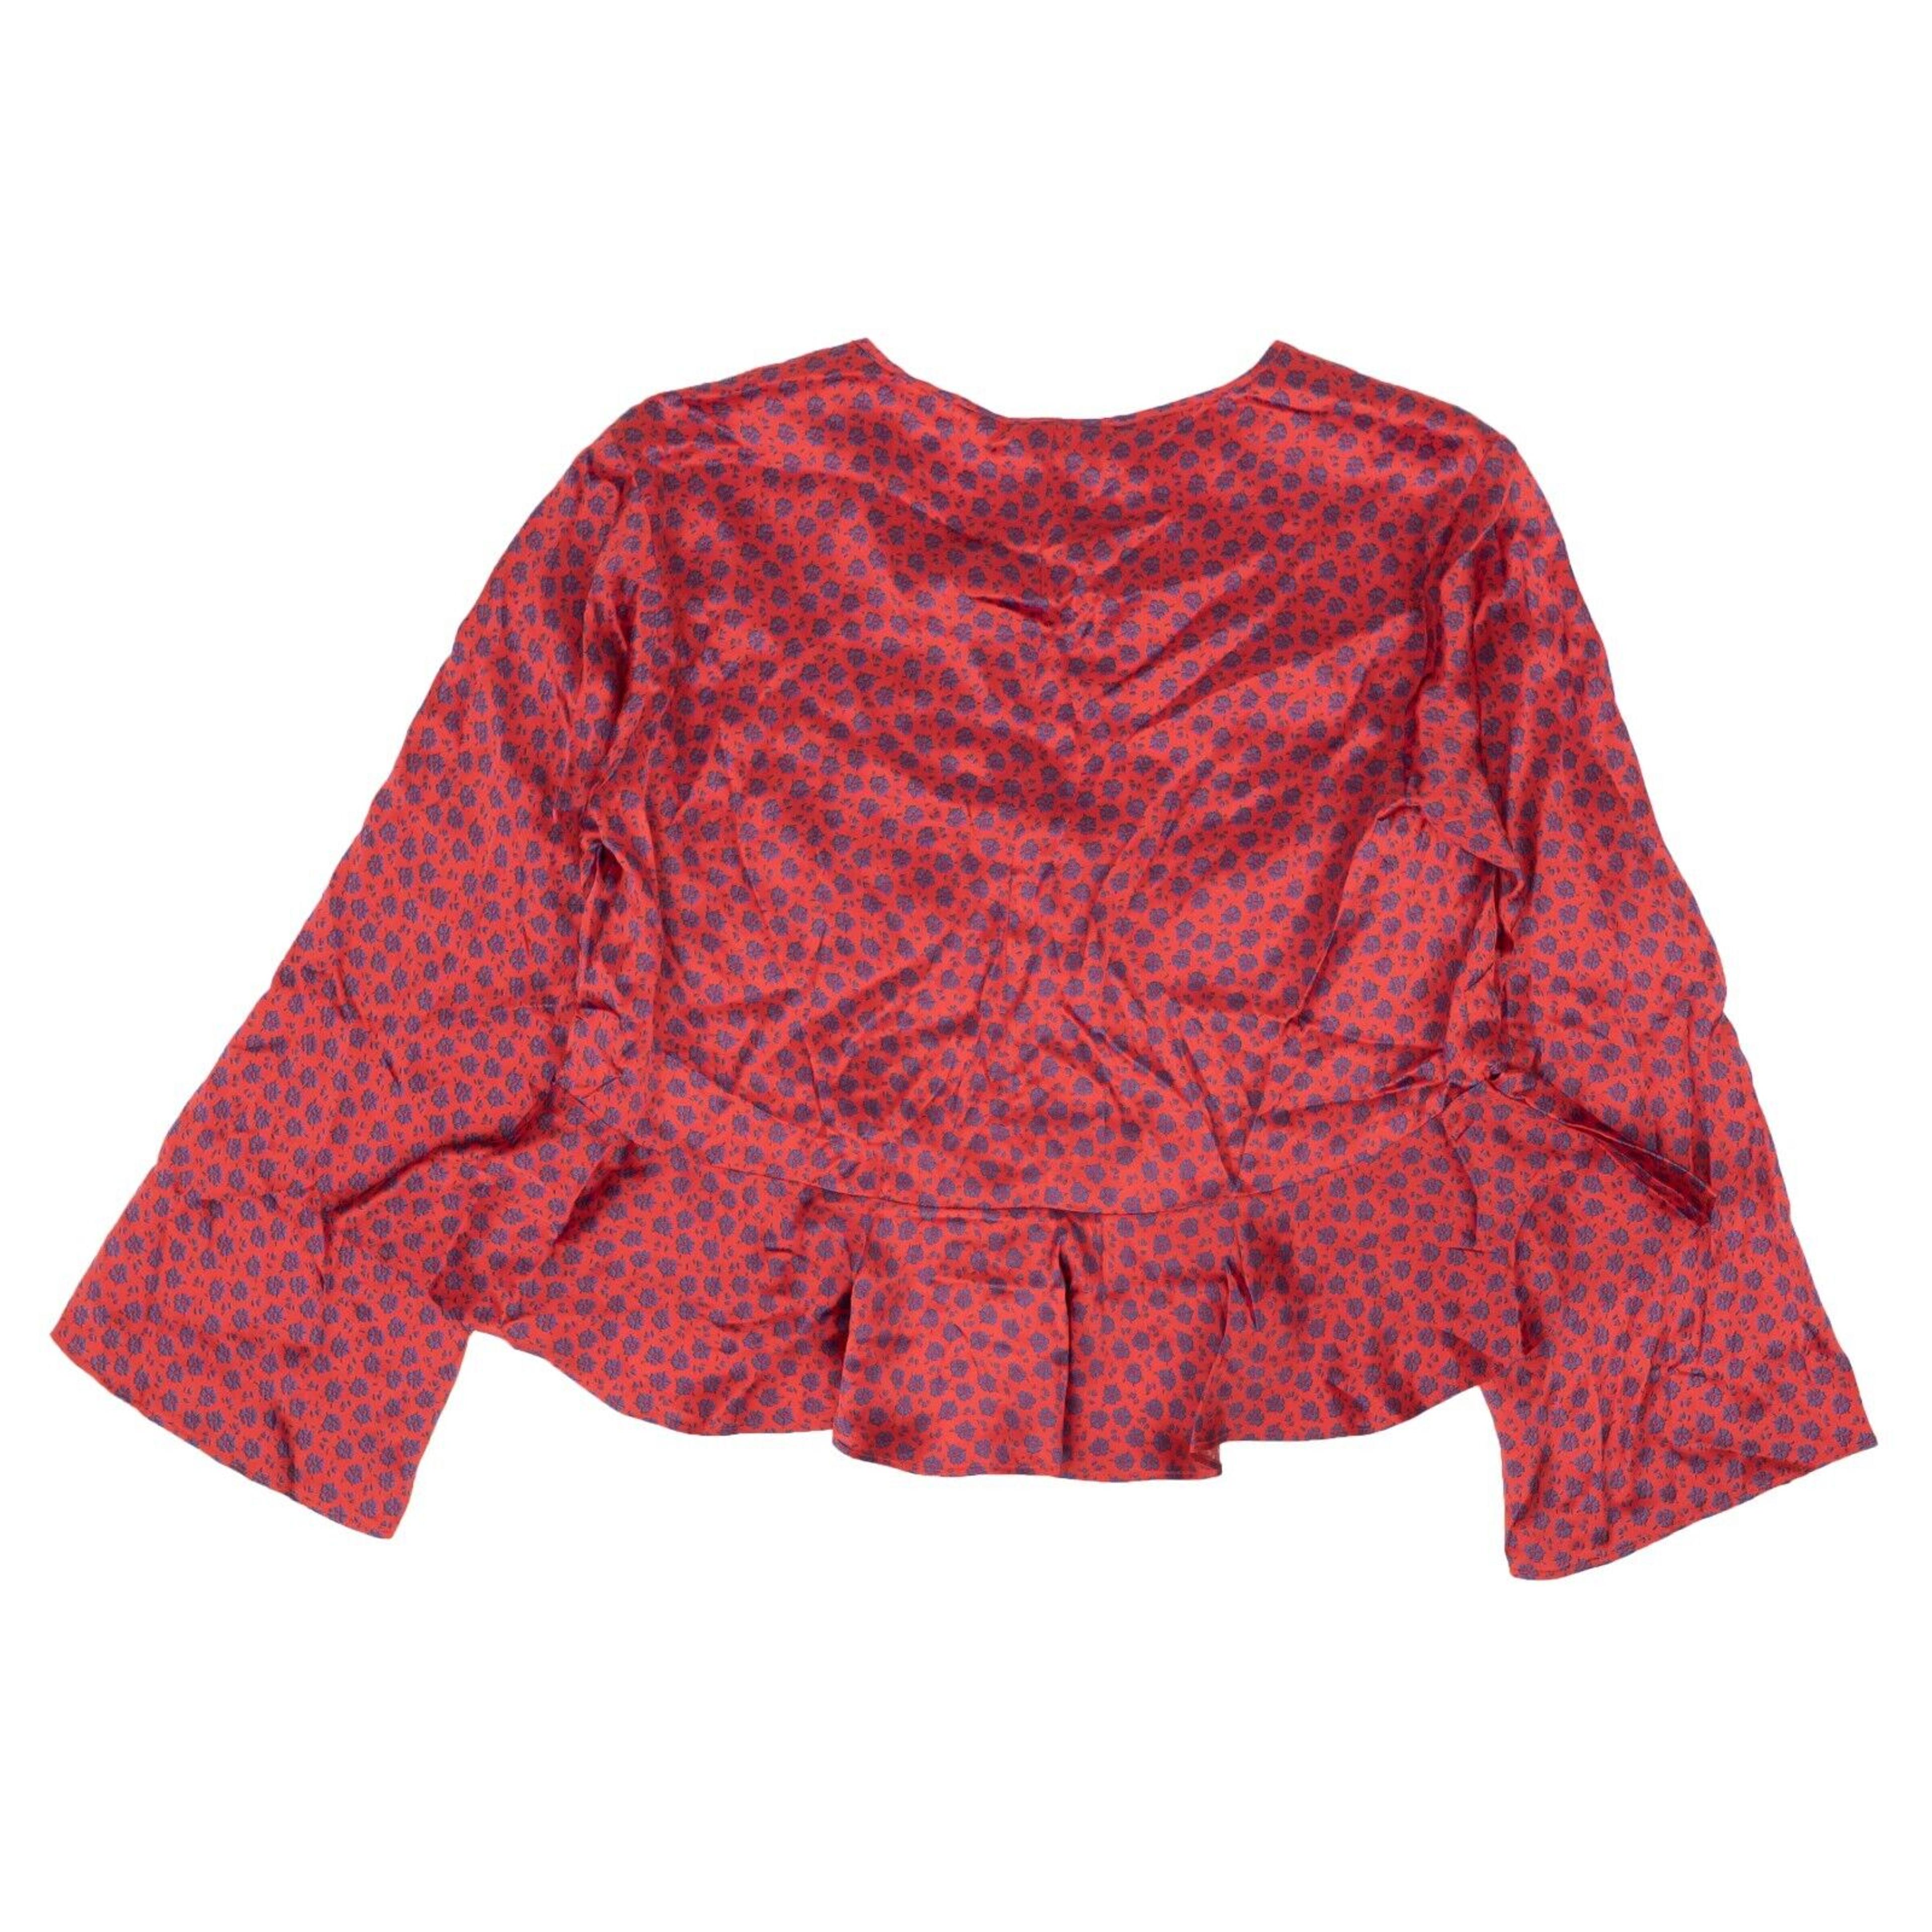 Alternate View 3 of Red Silk Cropped Floral Flounce Blouse